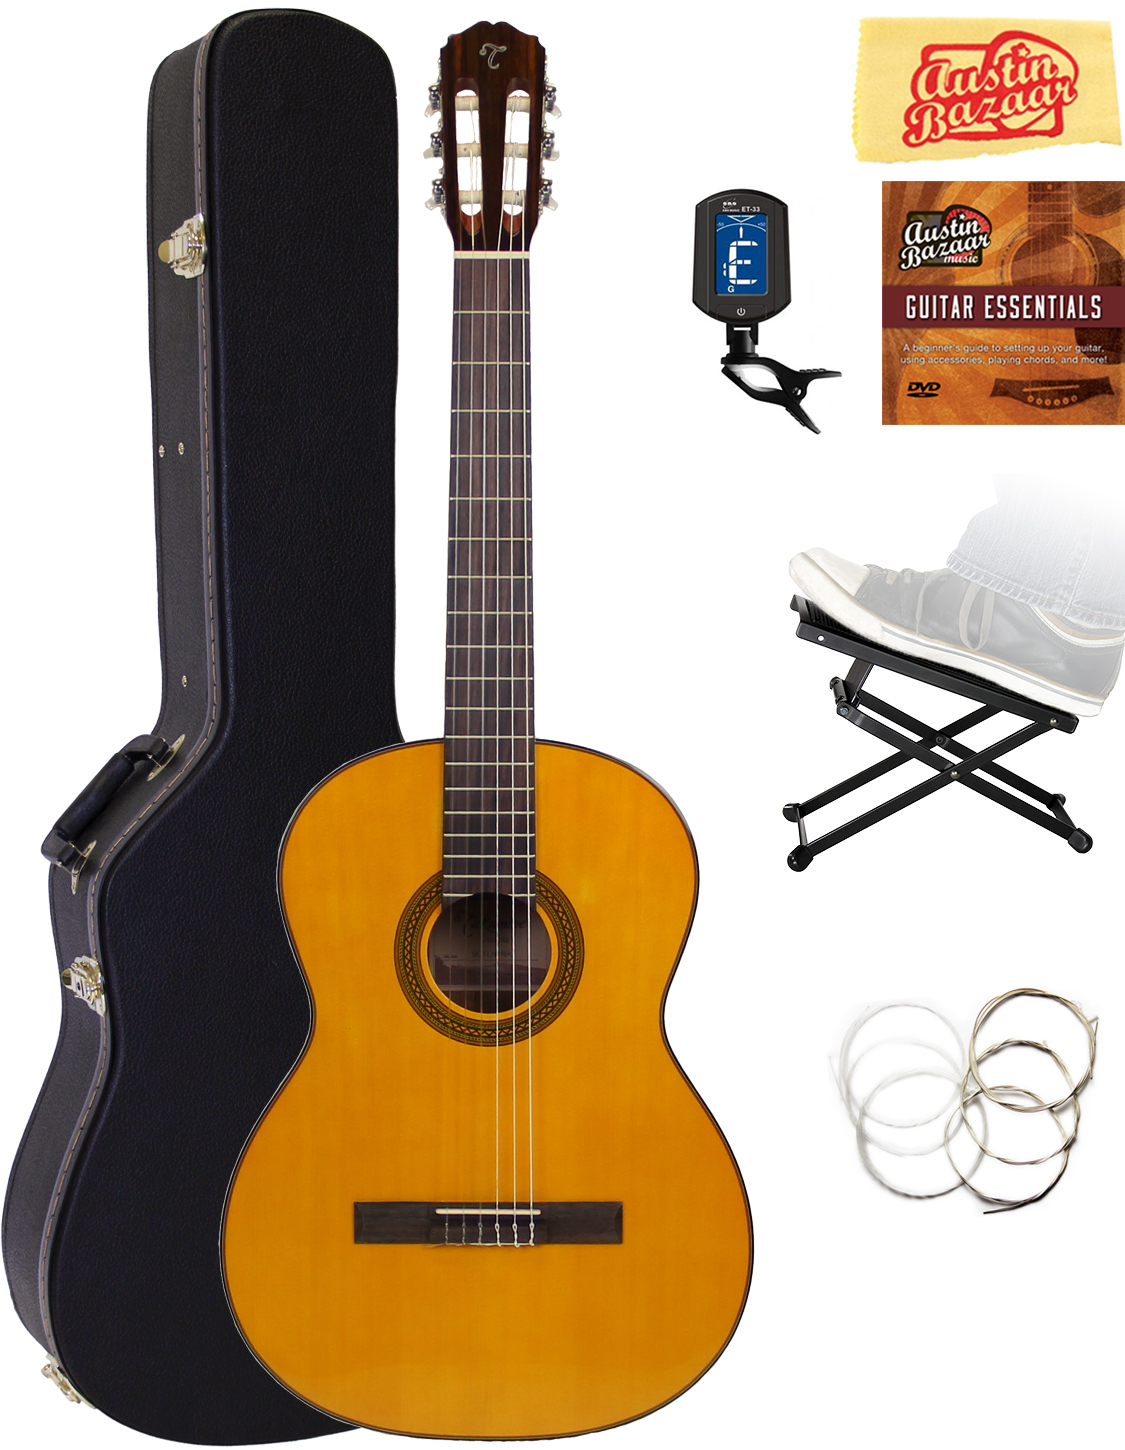 Takamine GC1LH Left-Handed Classical Guitar, Natural Gloss w/ Hard Case